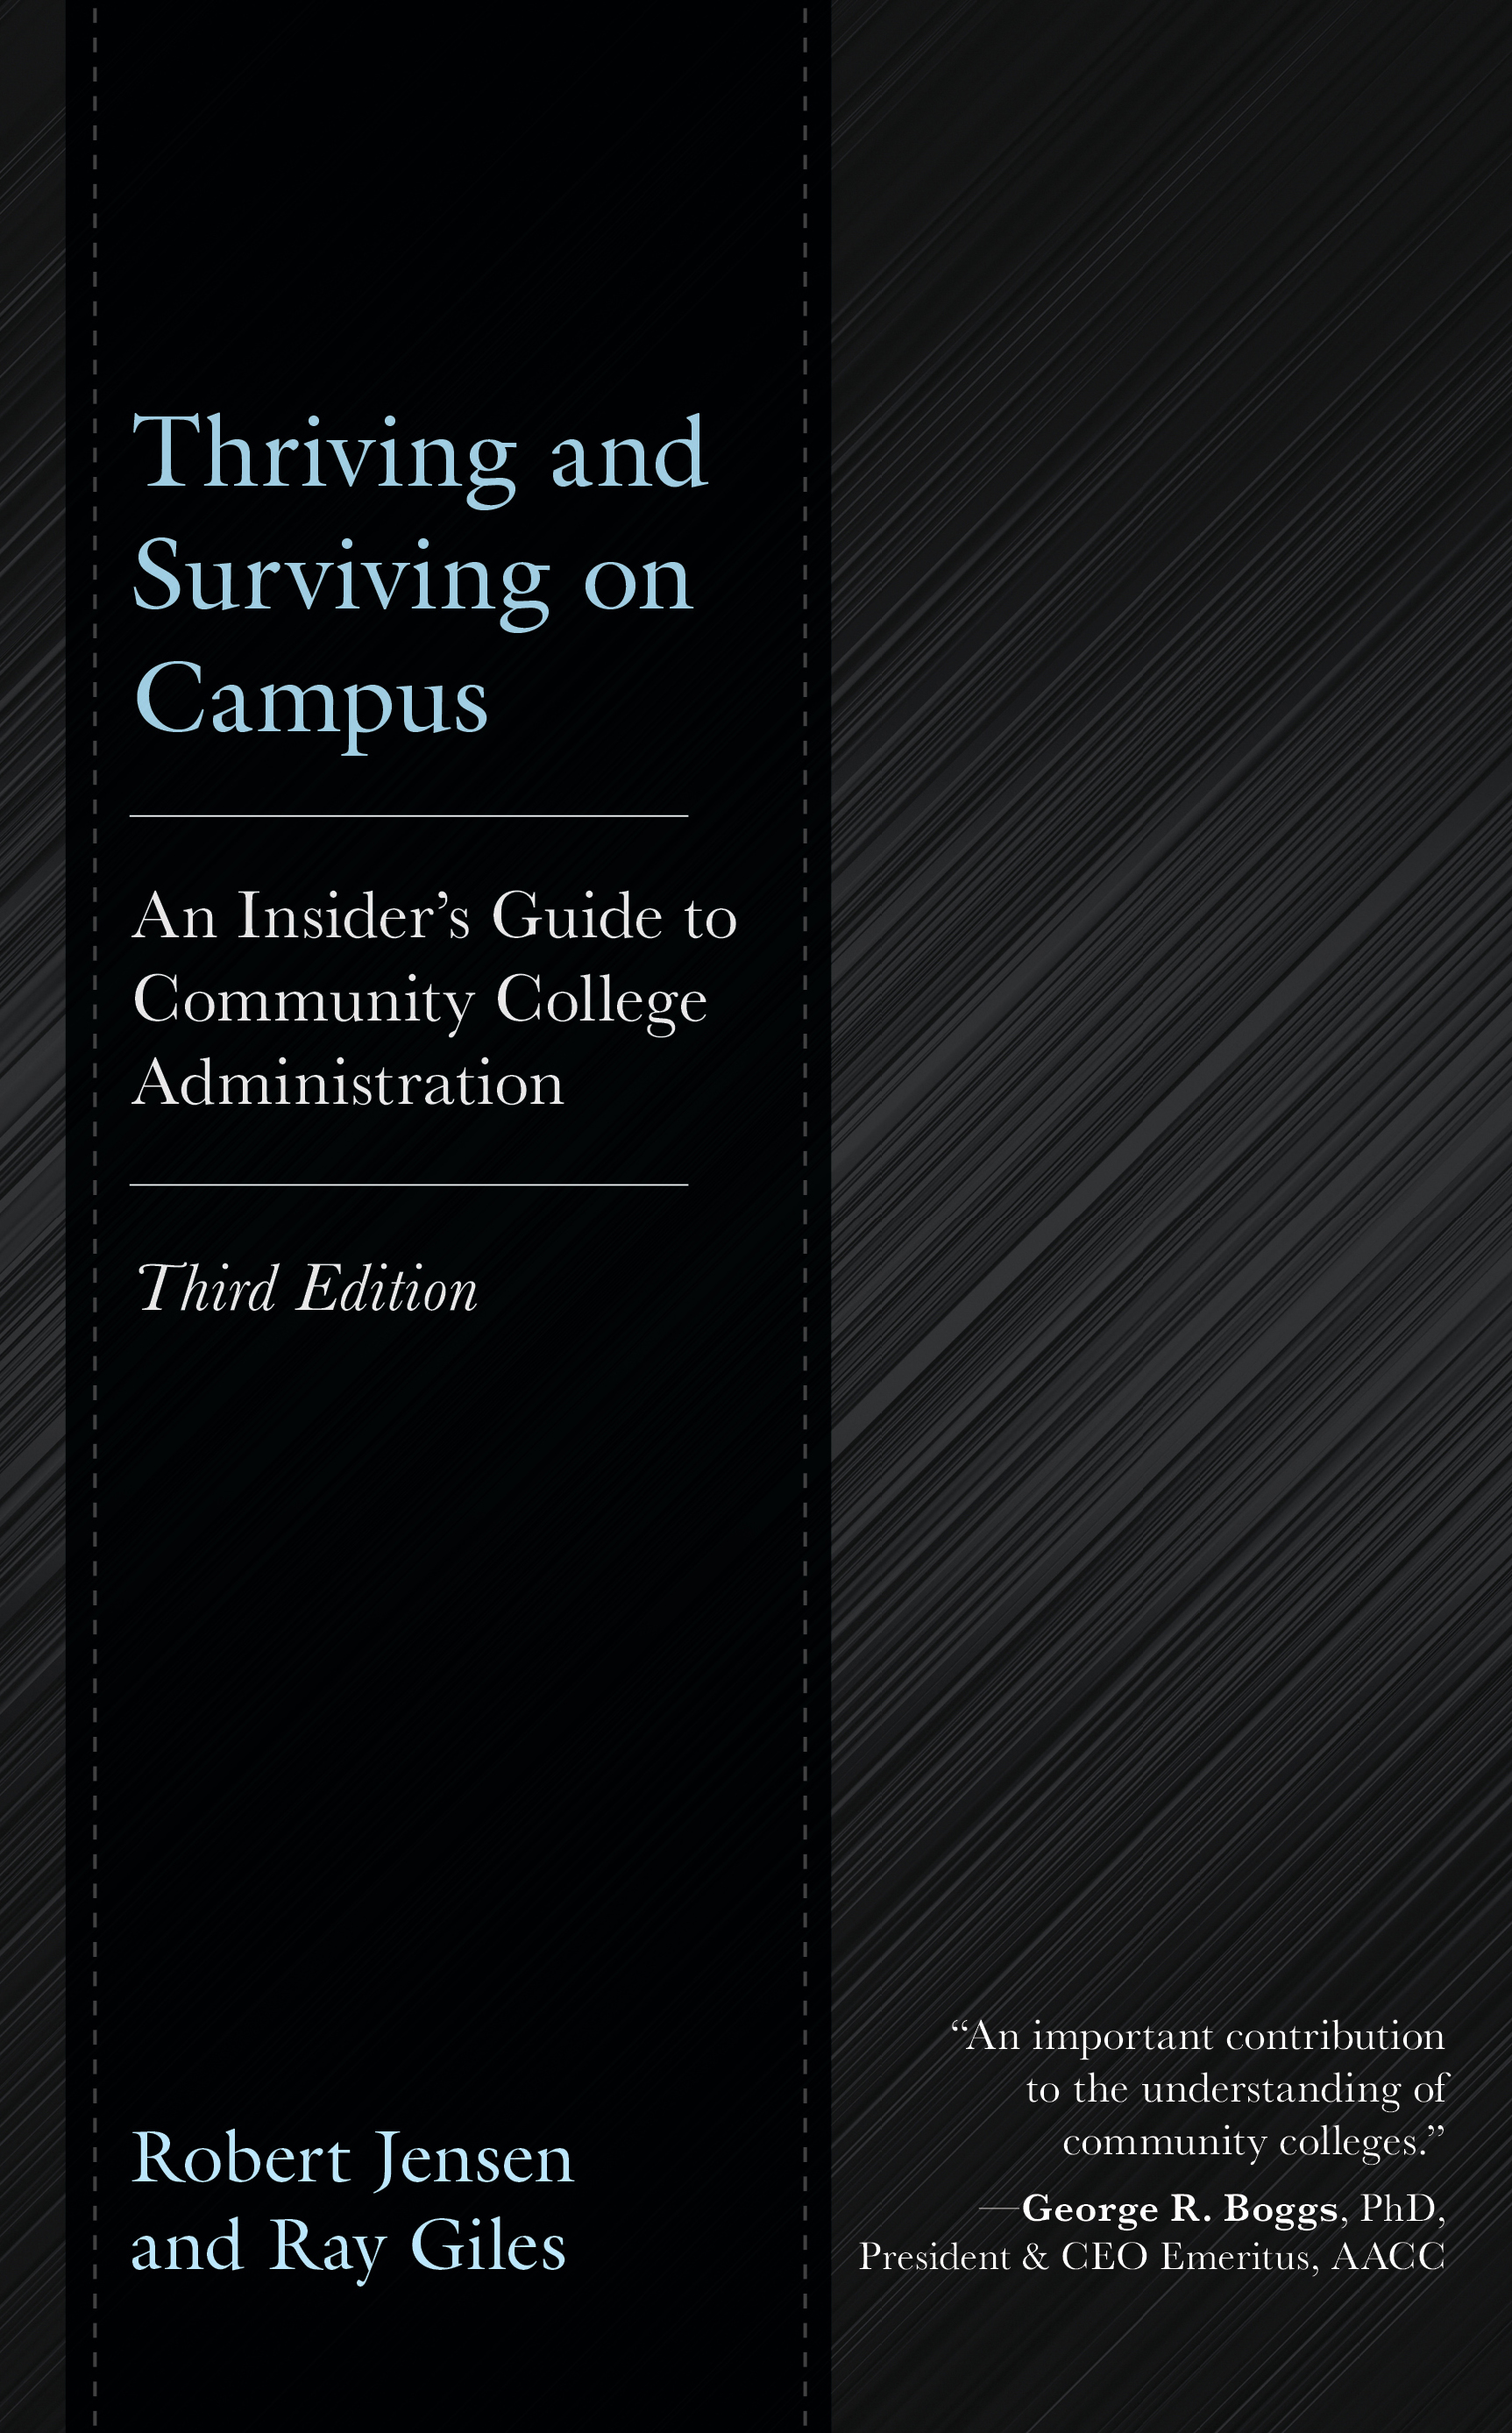 Thriving and Surviving on Campus: An Insider’s Guide to Community College Administration